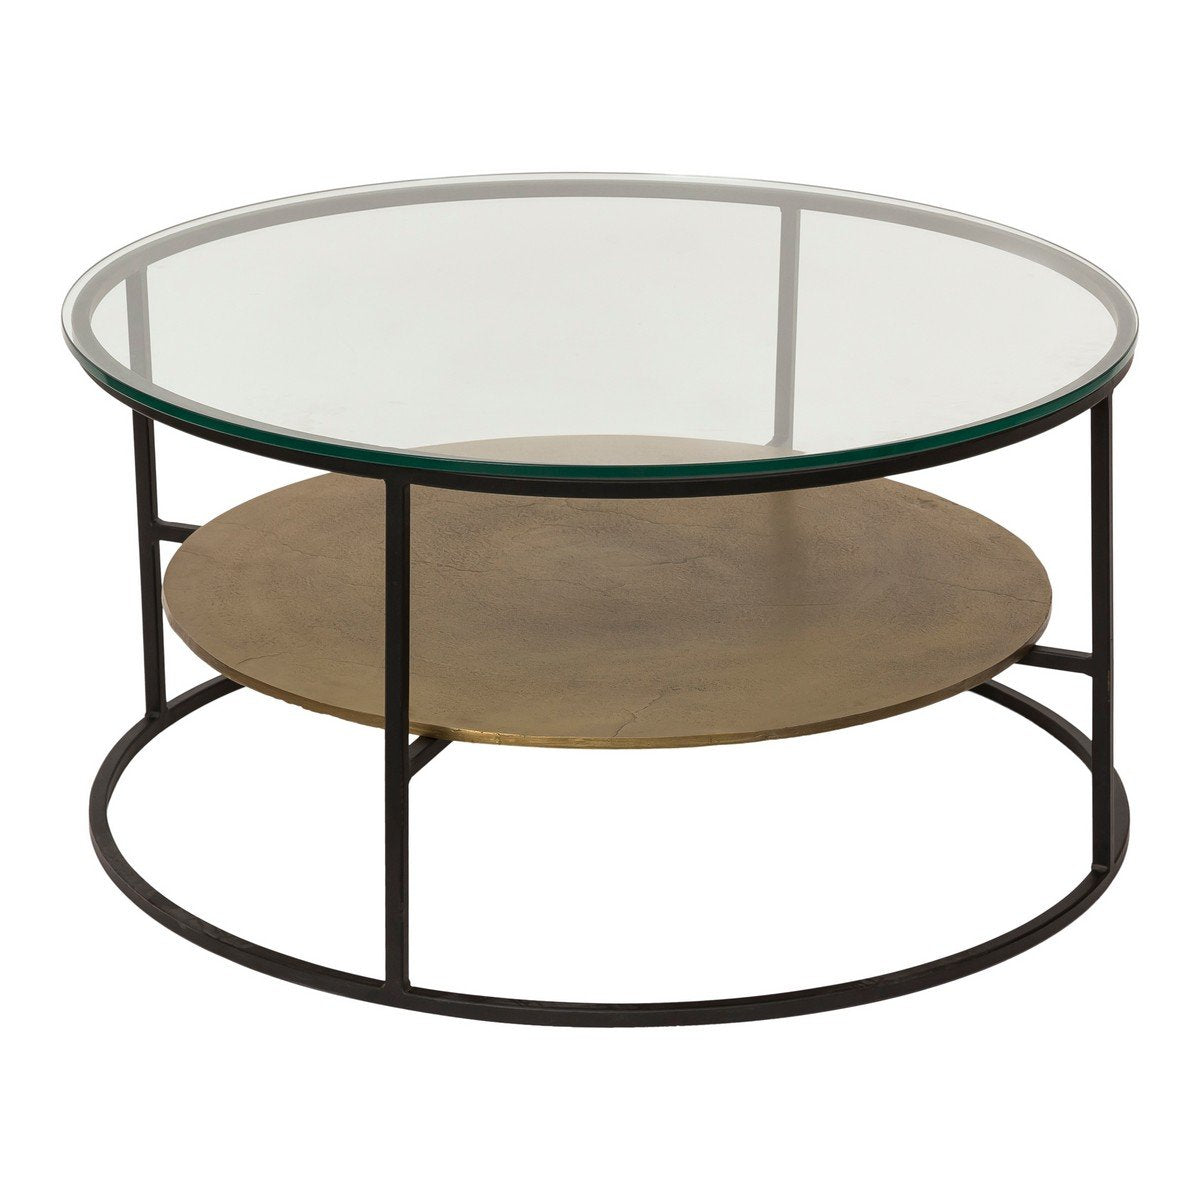 Moe's Home Collection Callie Coffee Table - ZY-1022-51 - Moe's Home Collection - Coffee Tables - Minimal And Modern - 1